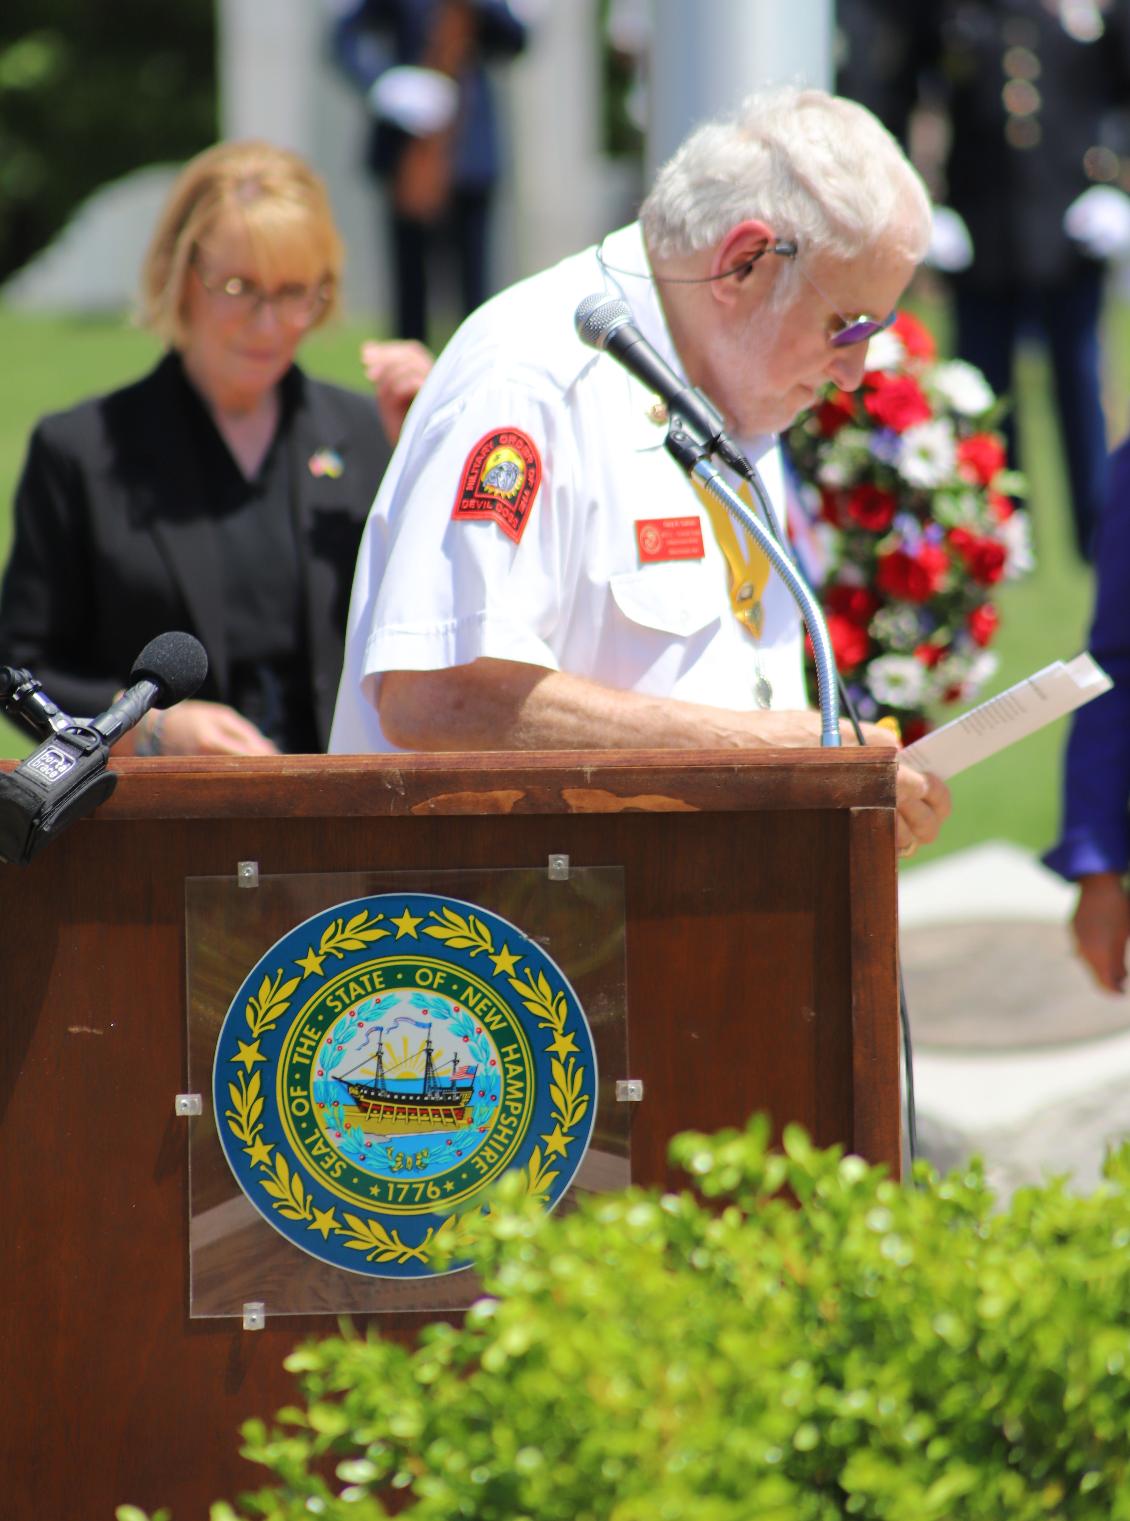 Memorial Day Ceremony 2022 New Hampshire State Veterans Cemetery - Gary Gahan NH Marine Corps League Benediction